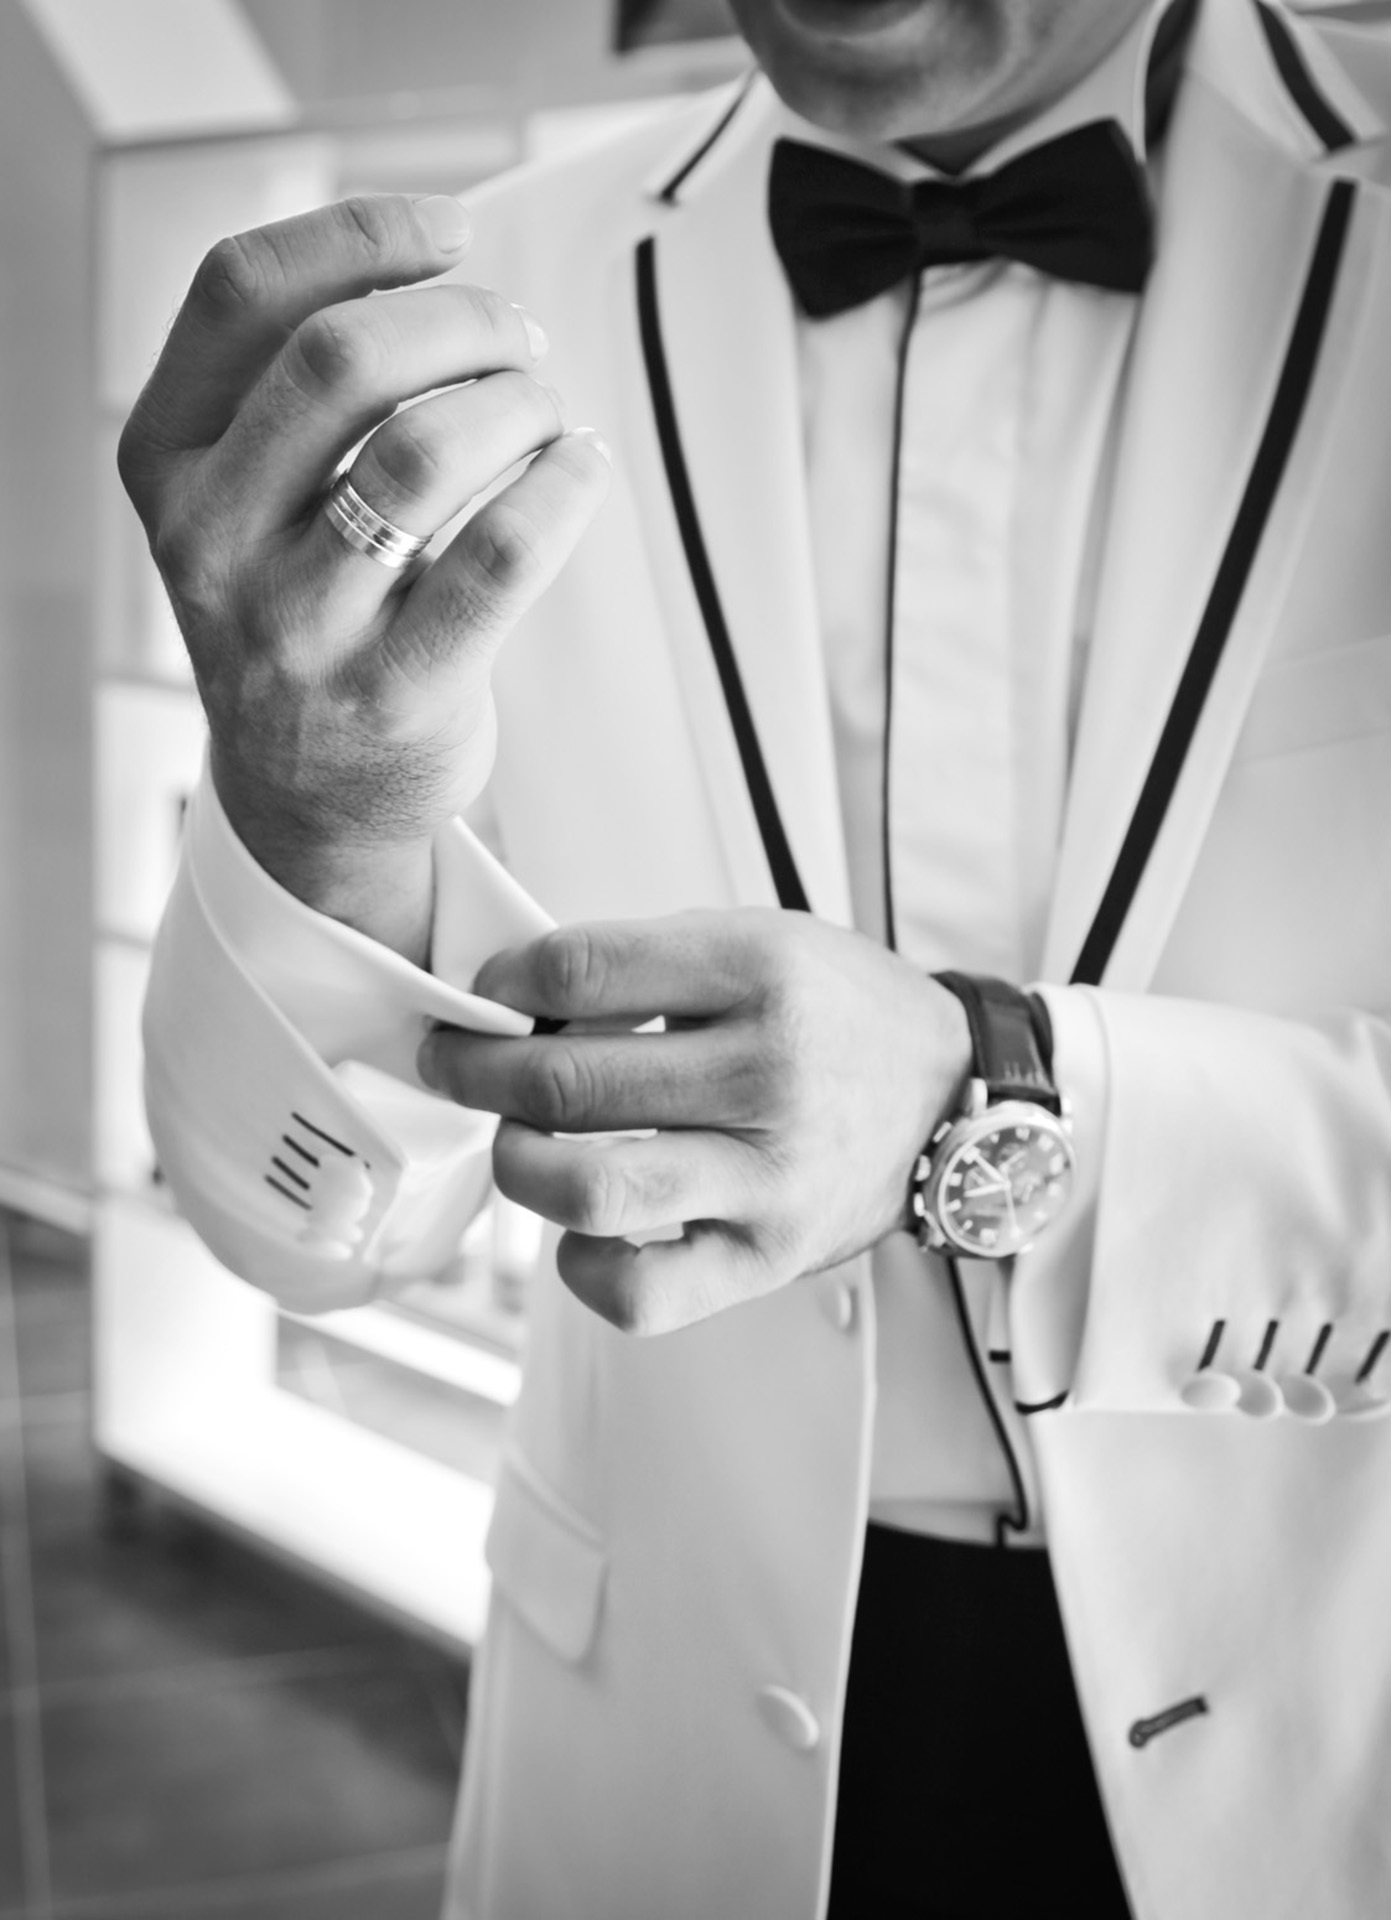 son-in-law-cufflinks-black-and-white-bow-tie-38270